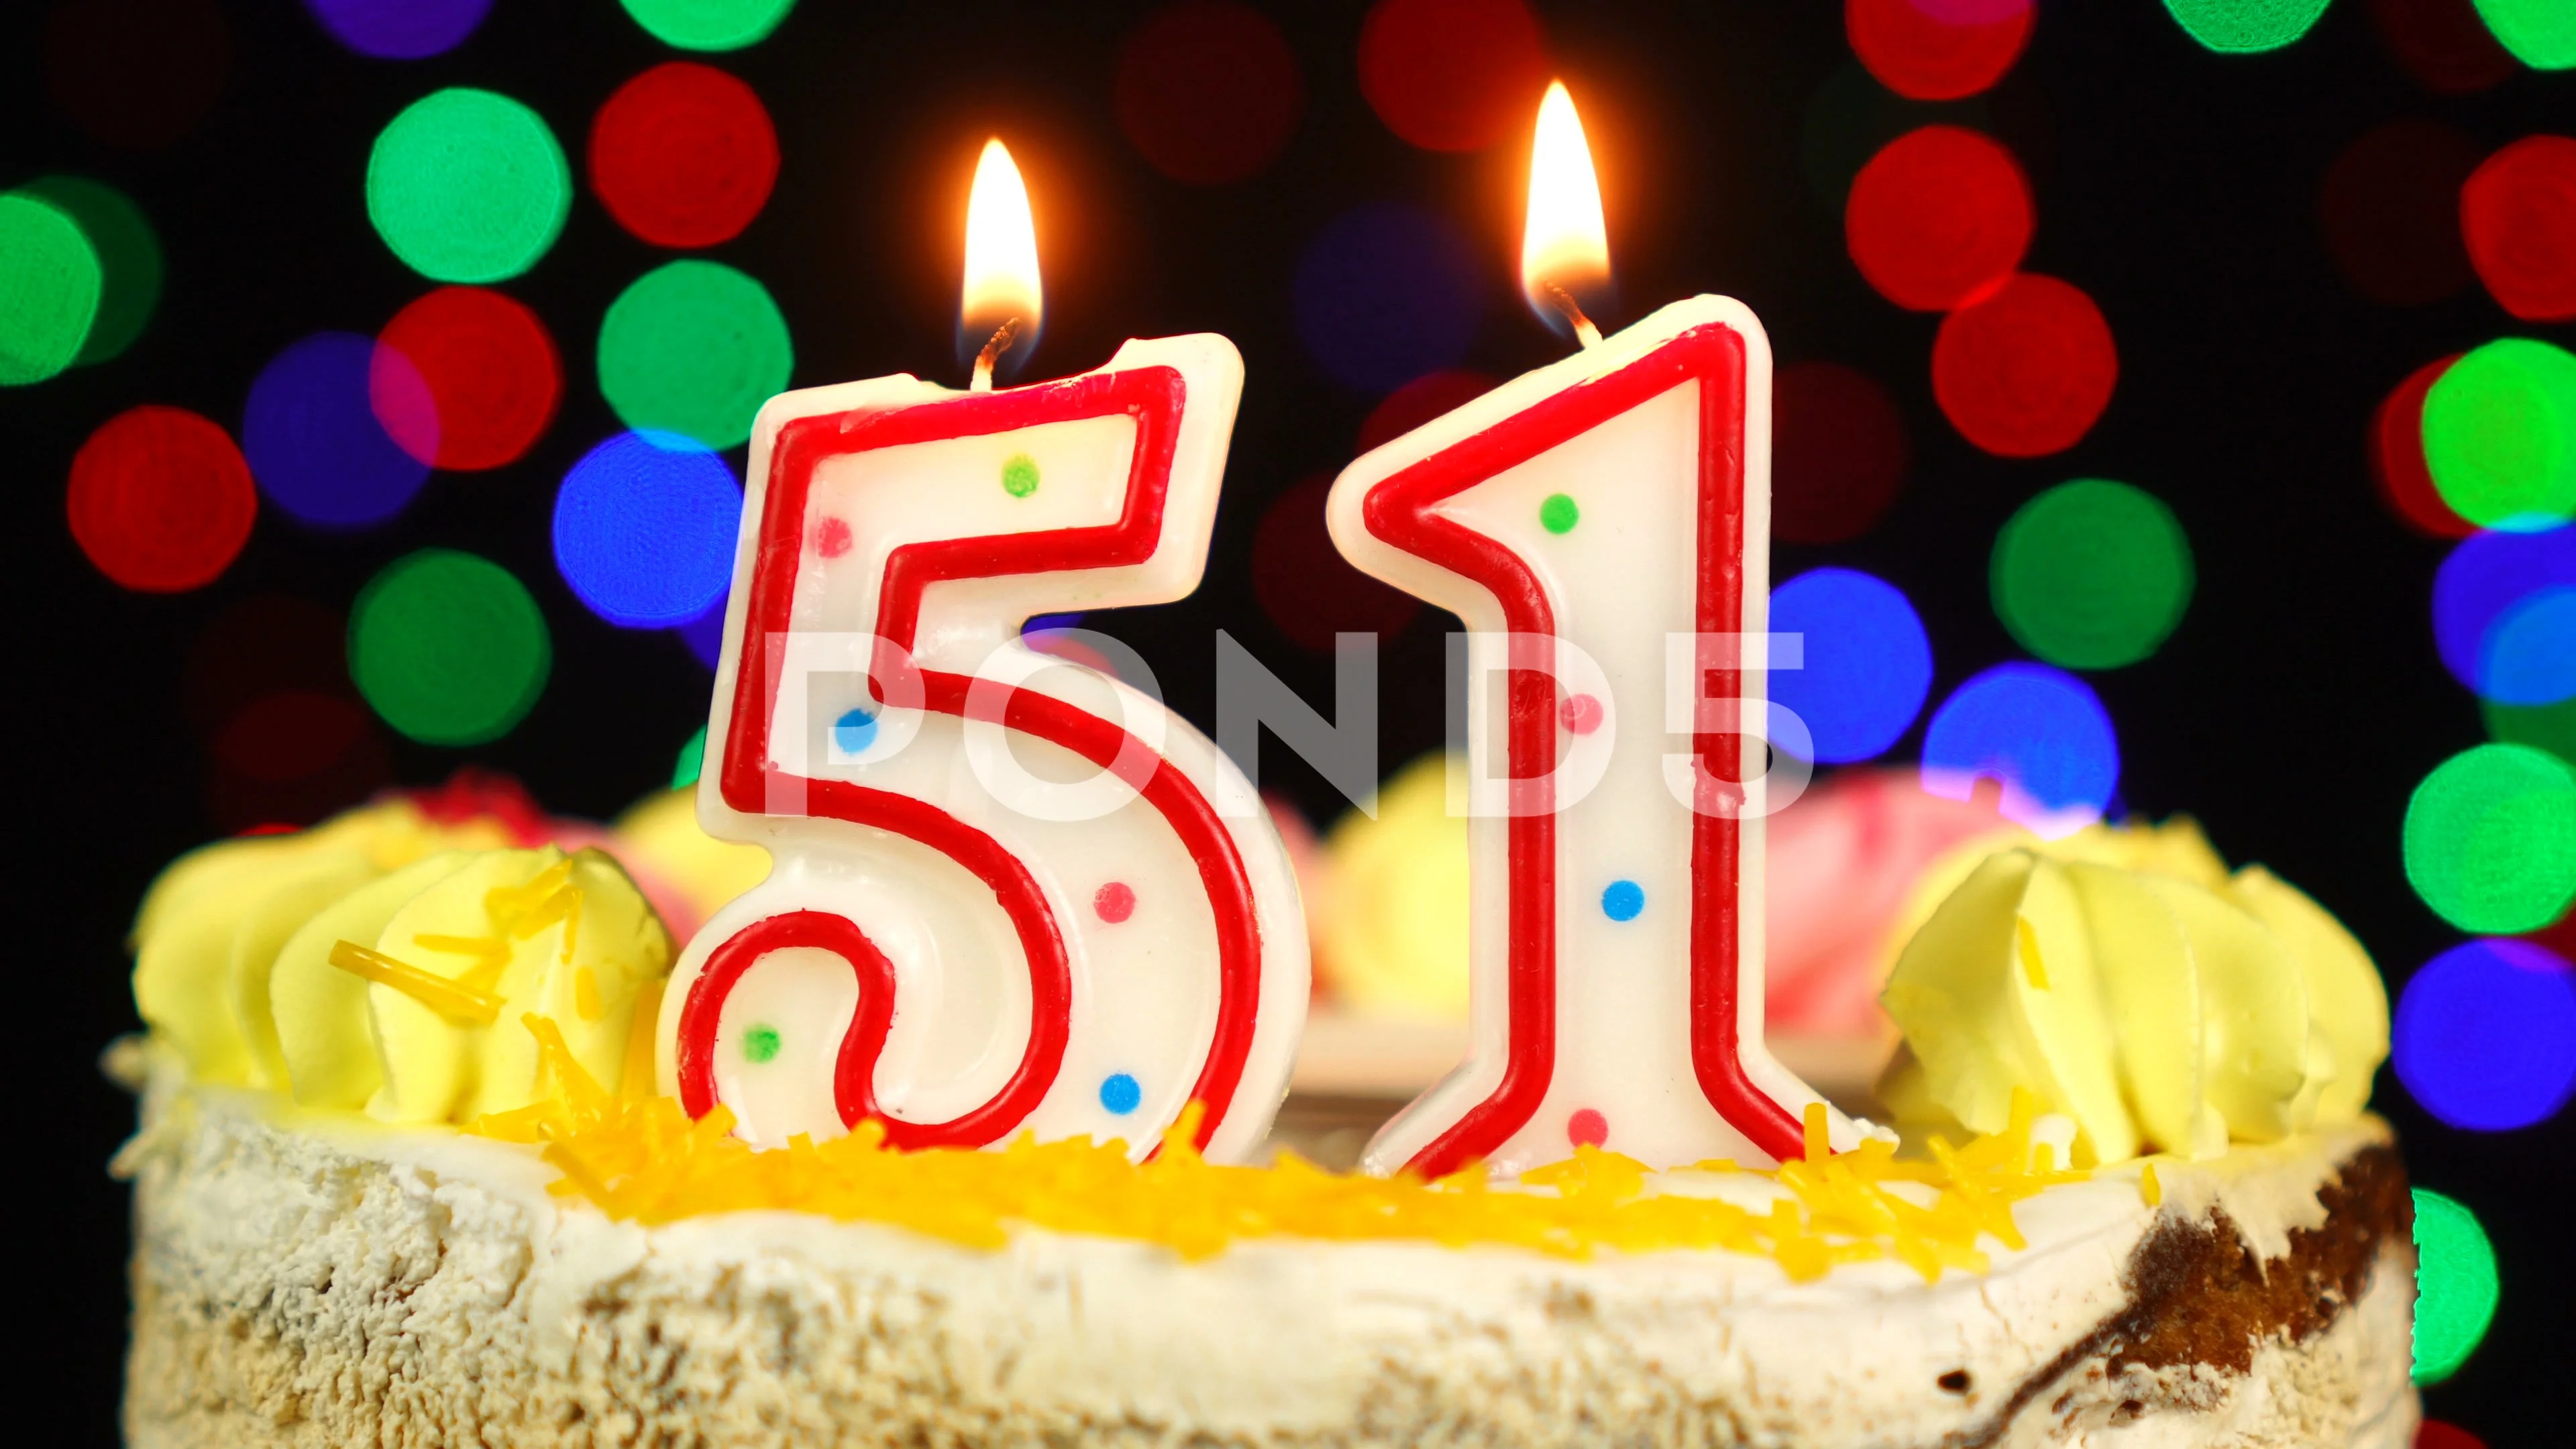 Birthday Cake with 51 Number Candle on Blue Backgraund Stock Image - Image  of macro, number: 170353241